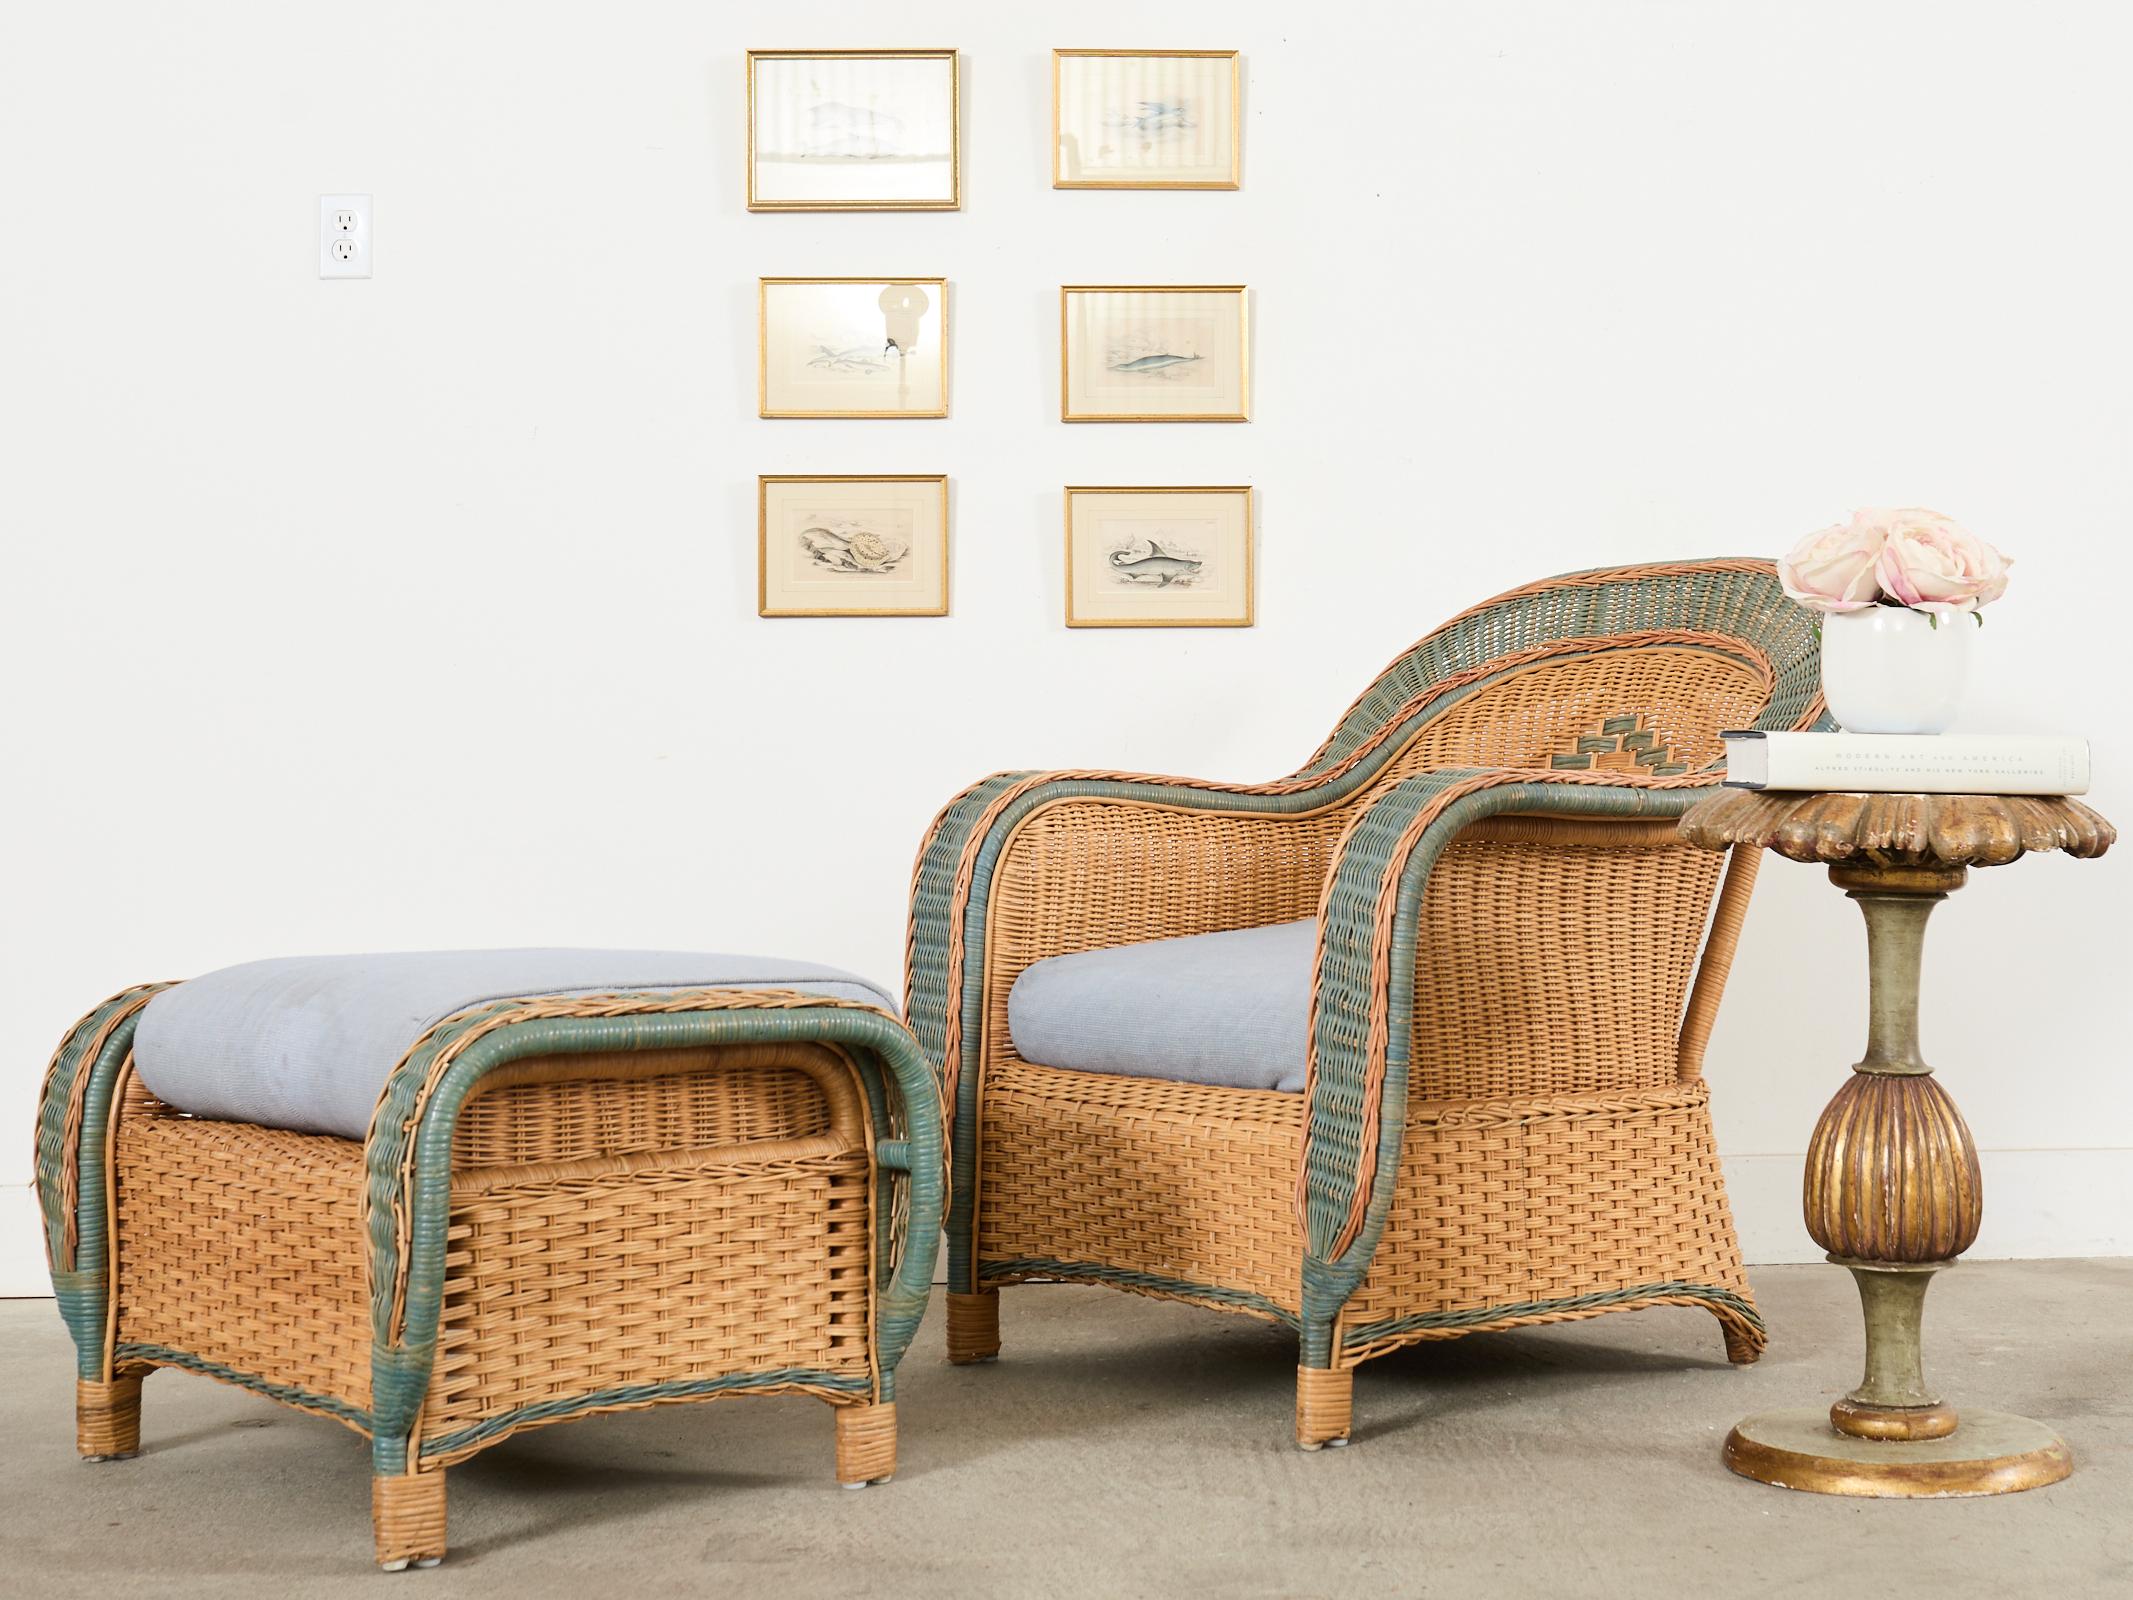 Organic modern French rattan and wicker lounge chair with ottoman made in the style and manner of Grange. The pair feature large rattan frames with gracefully curved back and sides having wide arm rests. The frames are covered with woven rattan